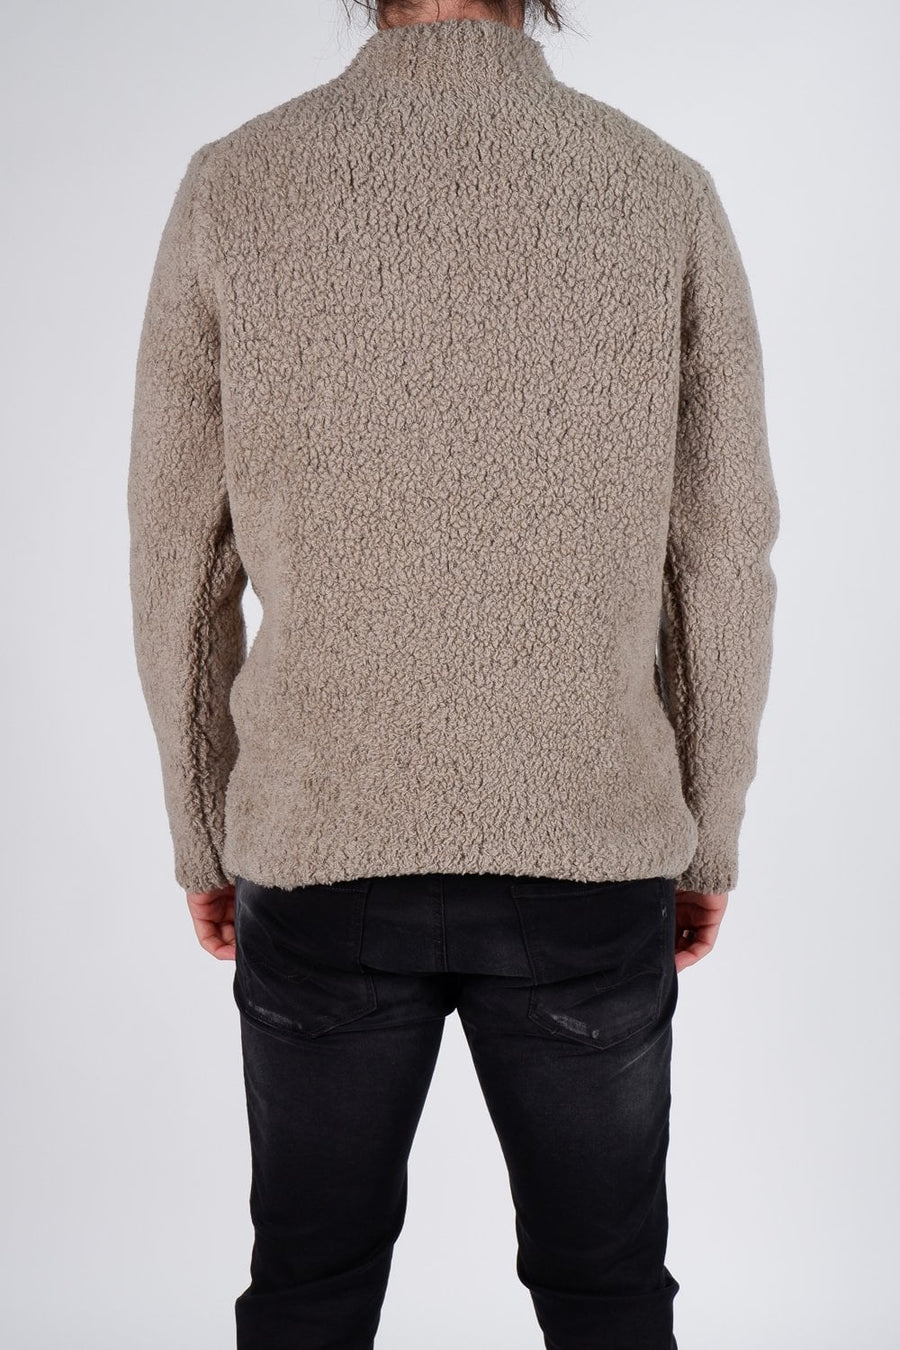 Buy the Daniele Fiesoli Teddy Knit in Beige at Intro. Spend £50 for free UK delivery. Official stockists. We ship worldwide.